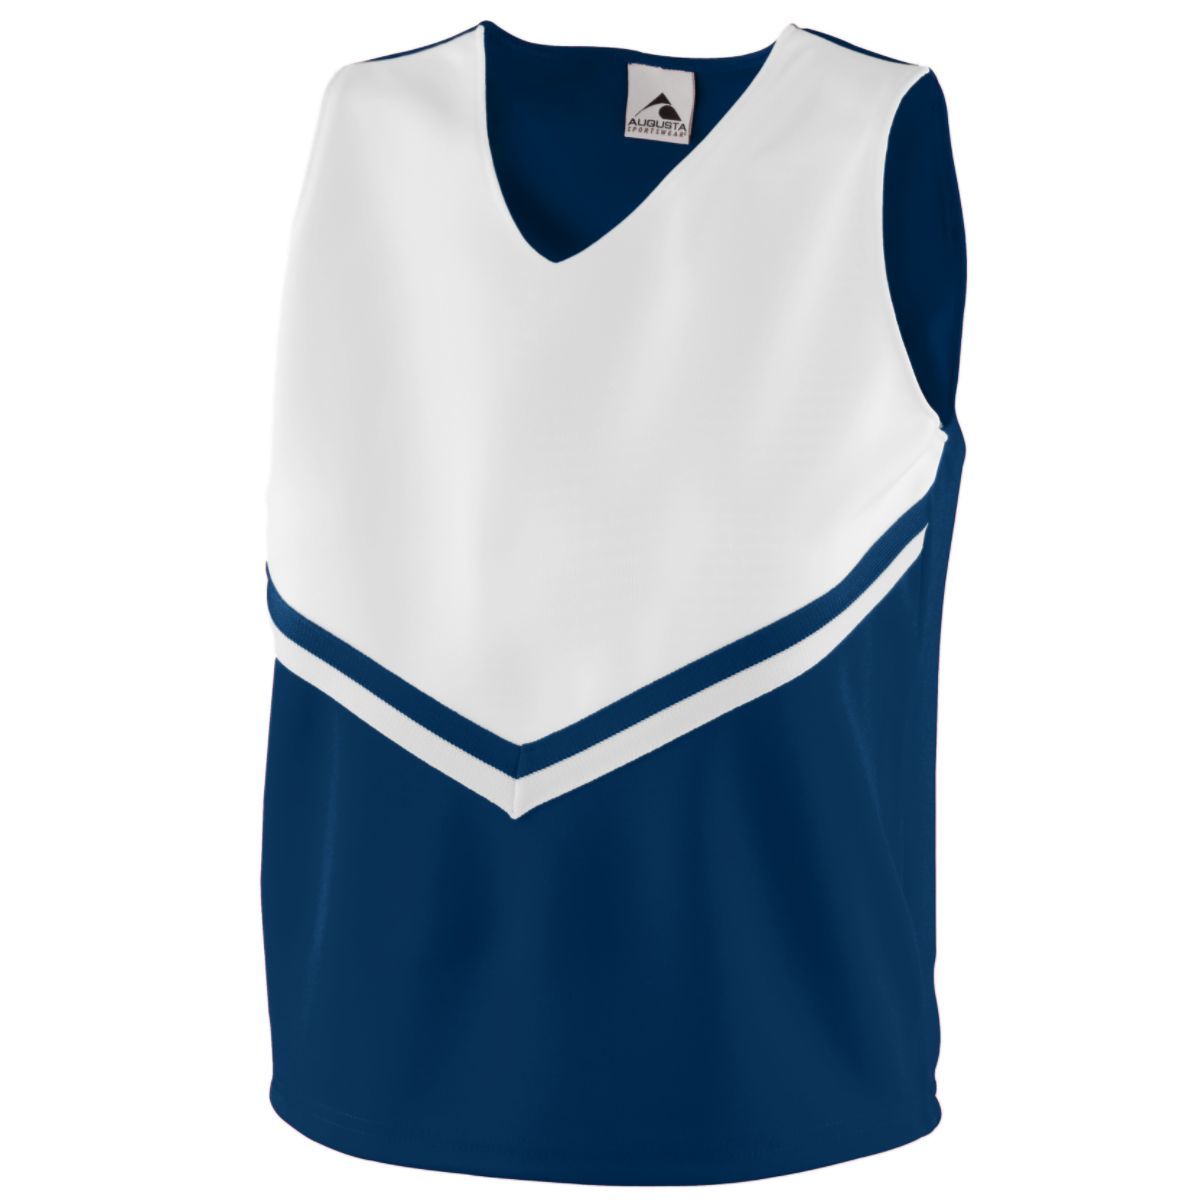 Augusta Sportswear Girls Pride Shell in Navy/White/White  -Part of the Girls, Augusta-Products, Cheer, Shirts product lines at KanaleyCreations.com